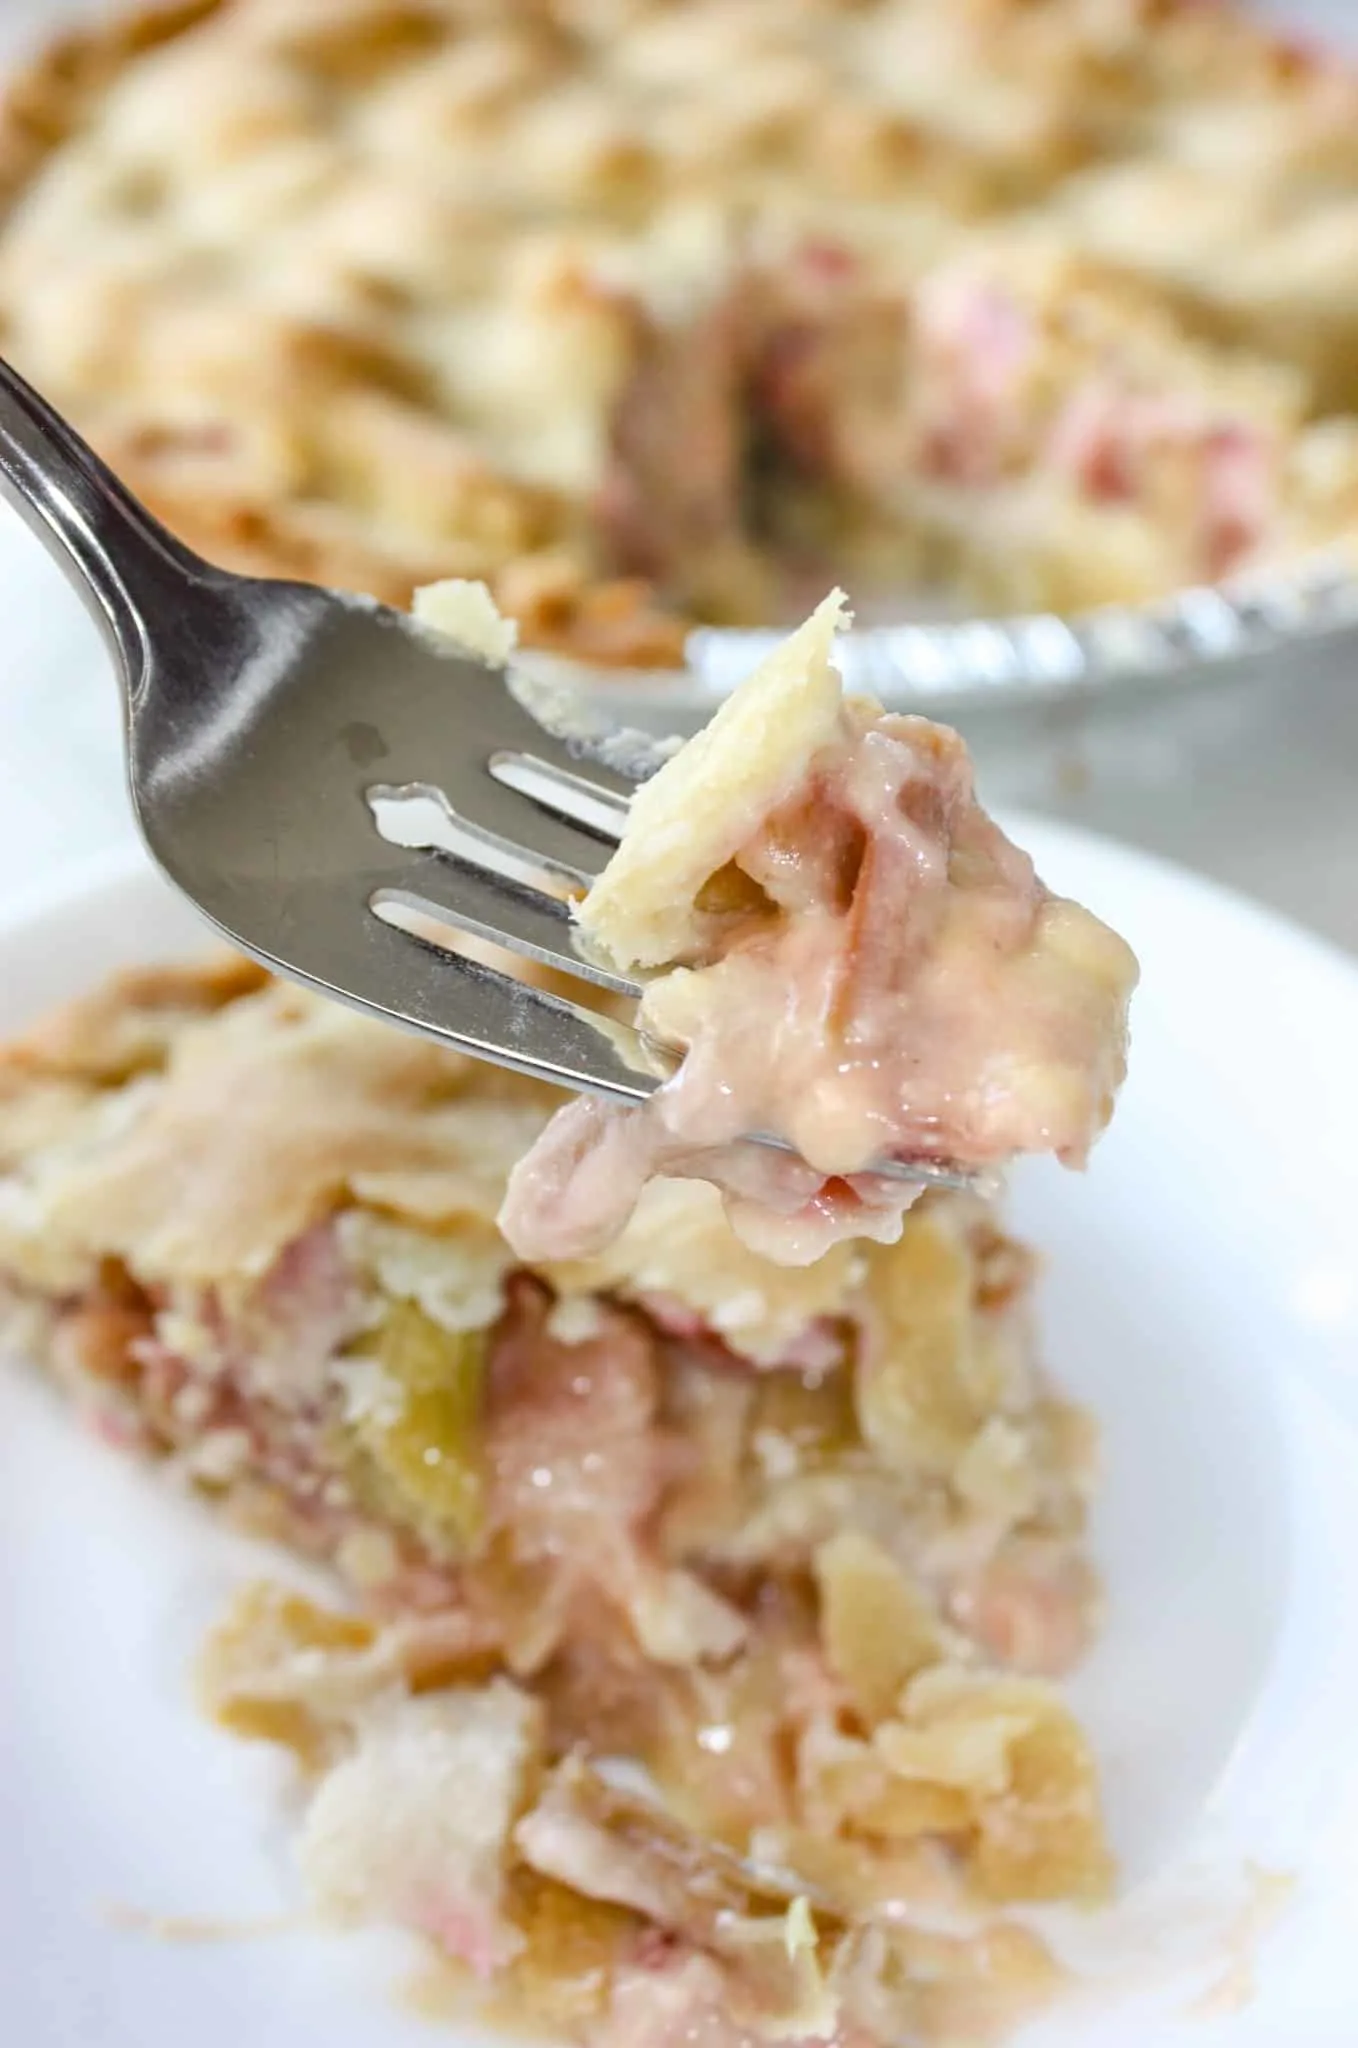 Gluten Free Rhubarb Pie is a blend of sweet and slightly tart flavouring.  I look forward to this tasty dessert every year when this spring vegetable is harvested from the garden.